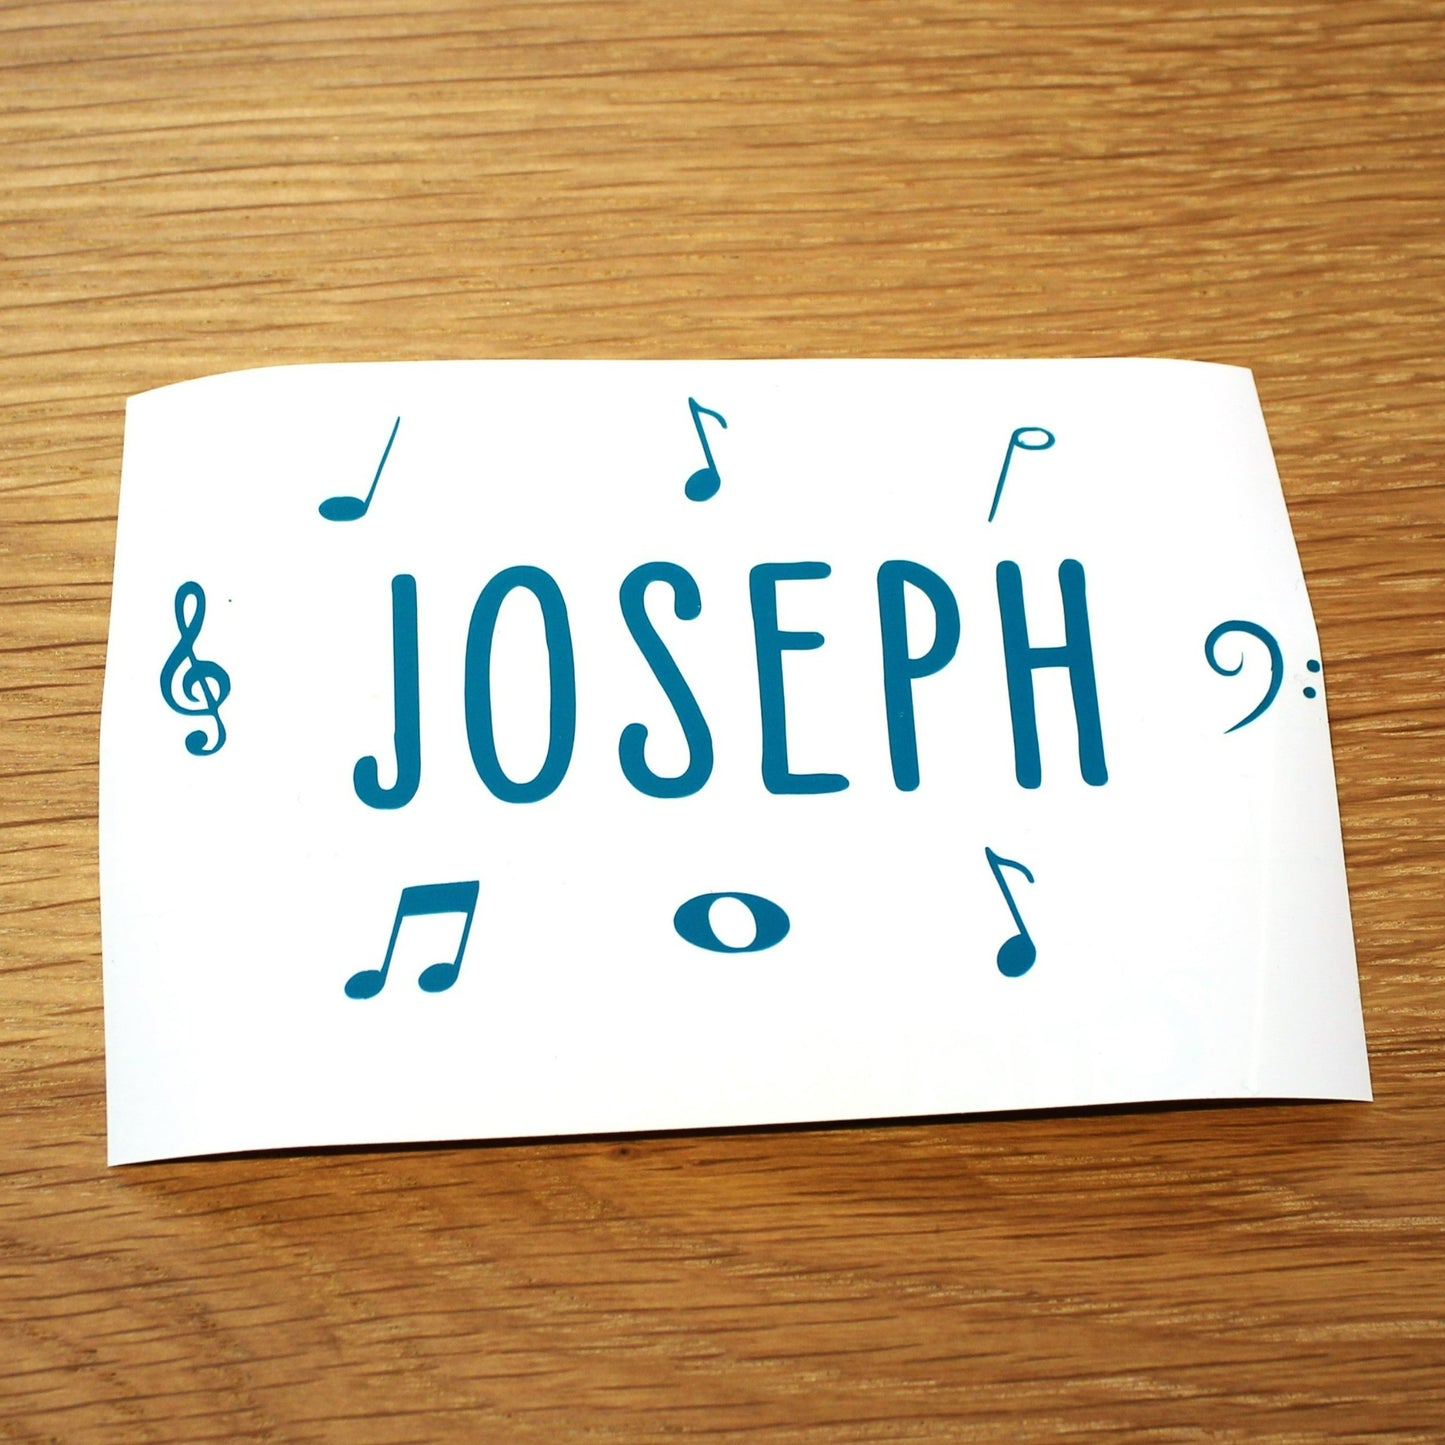 Name in plain capitals with music symbols around. Teal lettering.